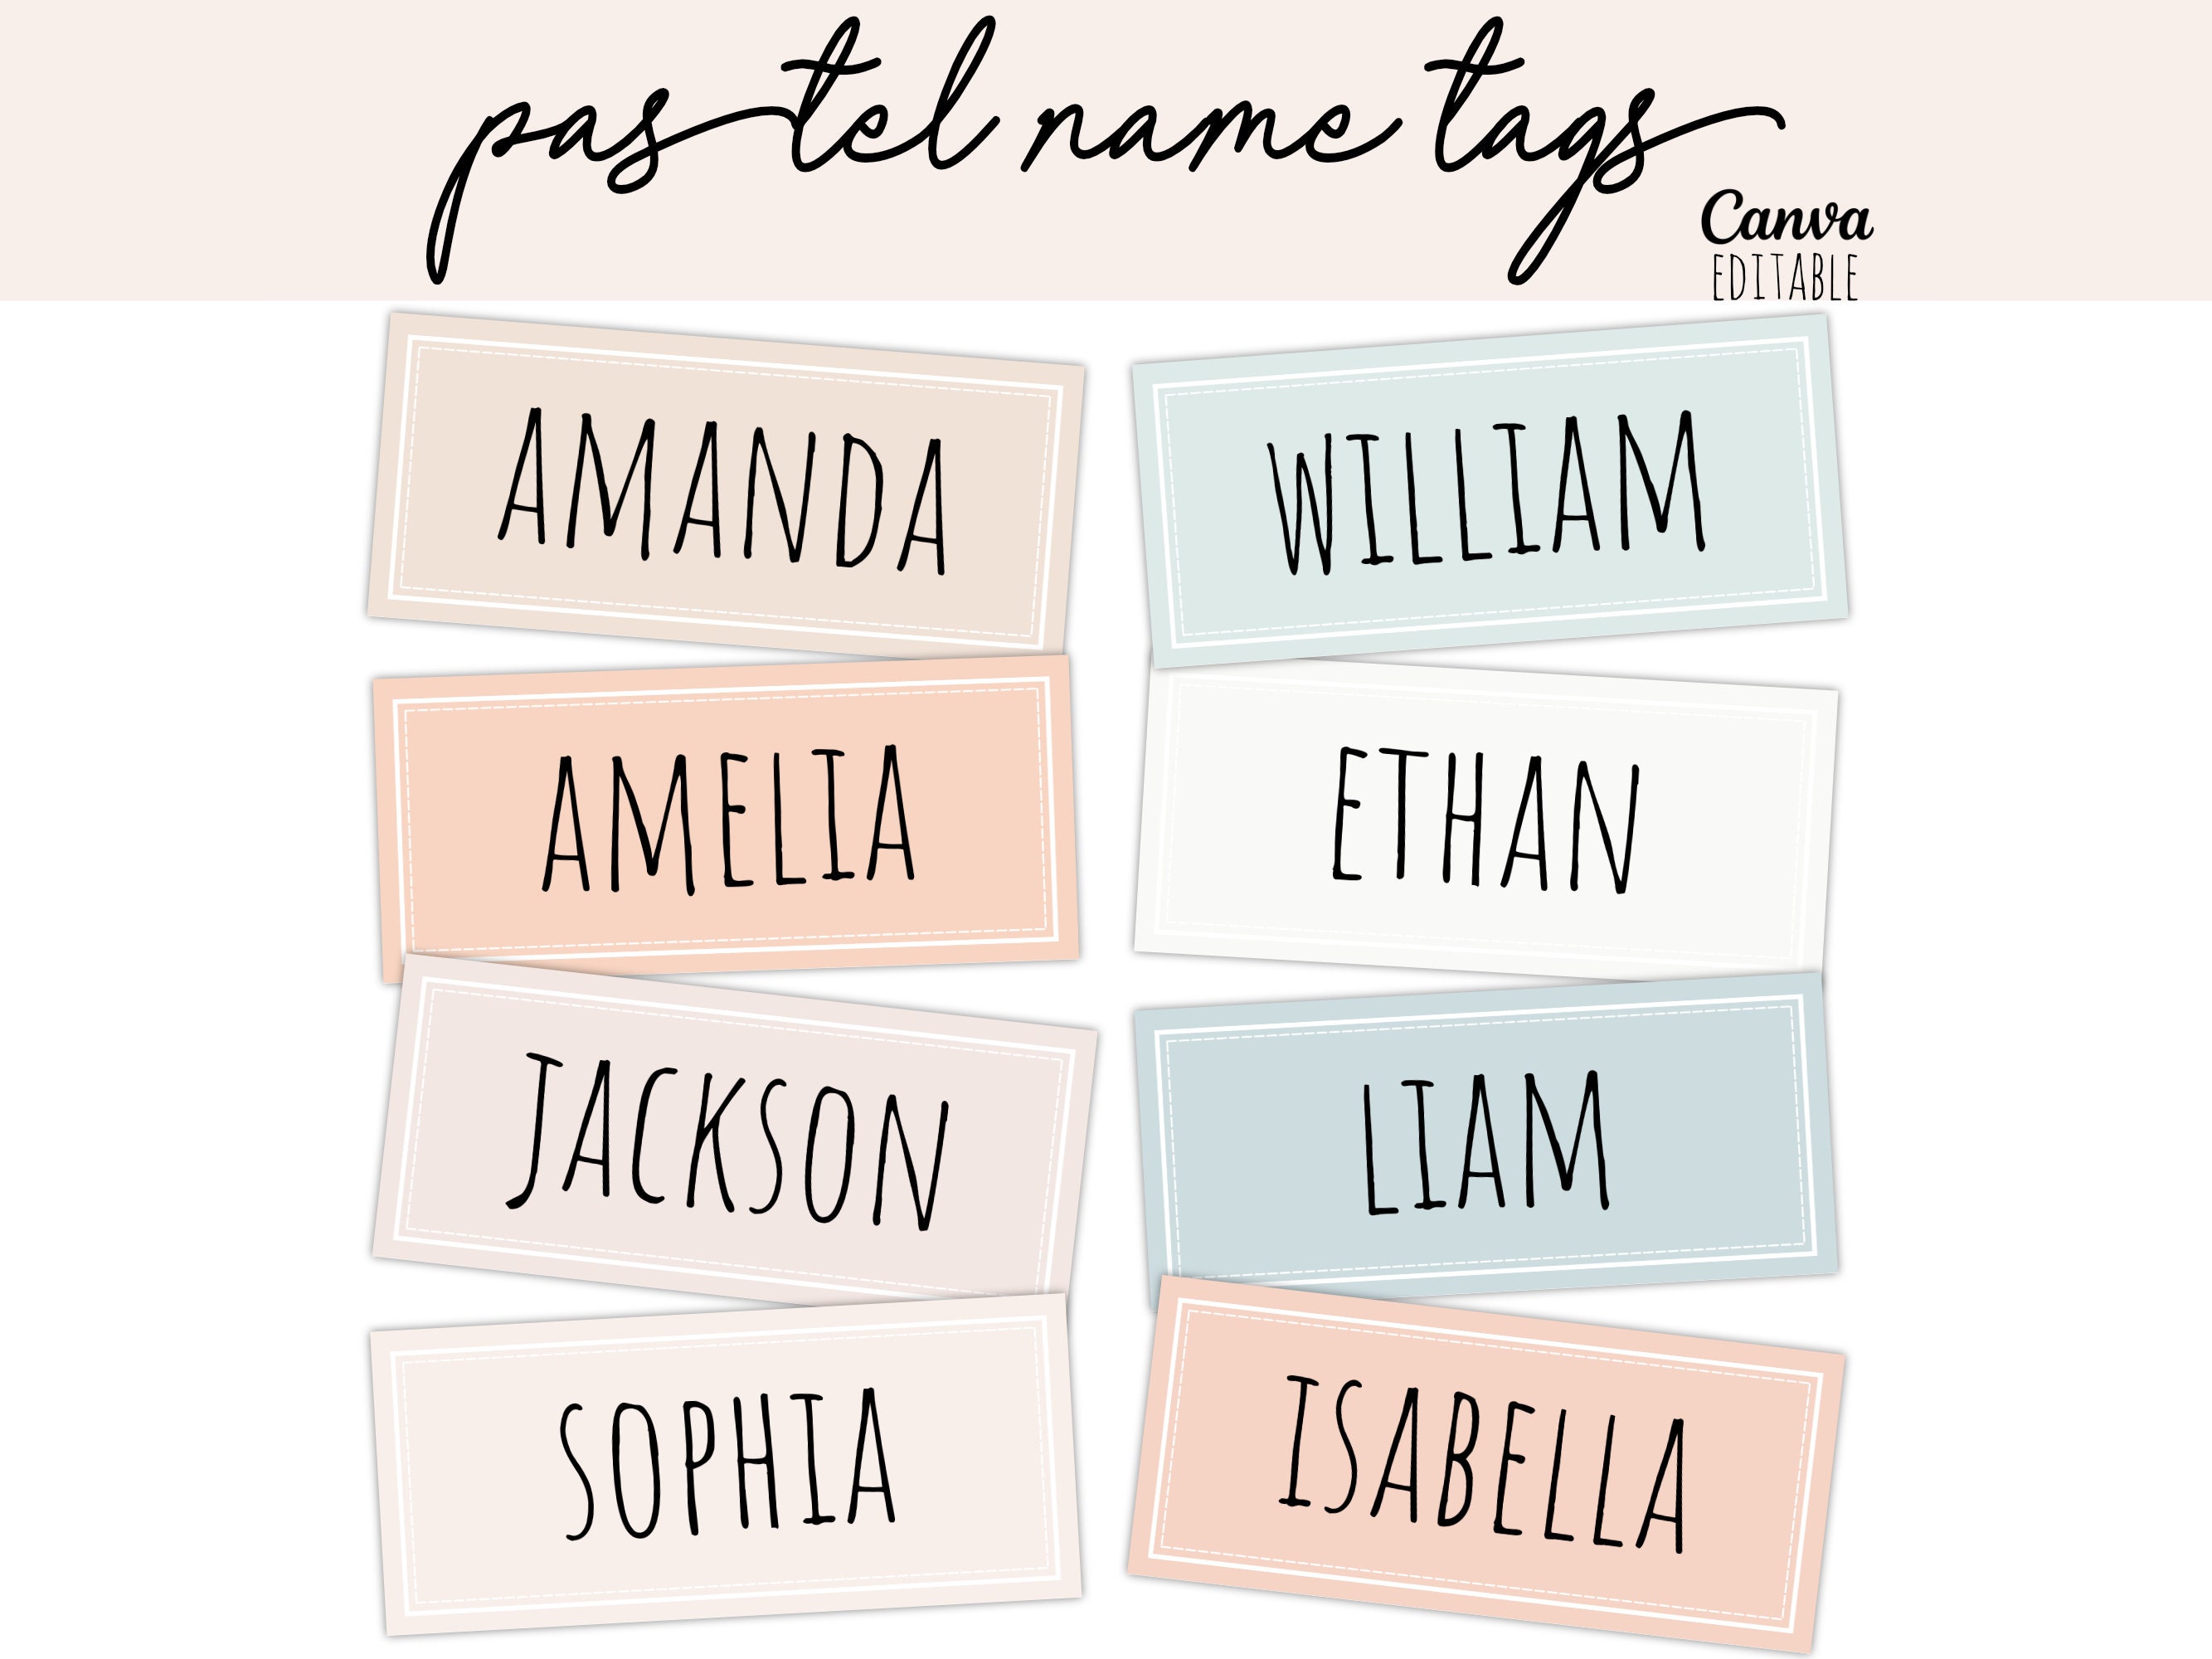 Editable Pastel Rainbow Watercolor Classroom Labels, Name Tags, Book Bin  Label, Spring, Easter Decor